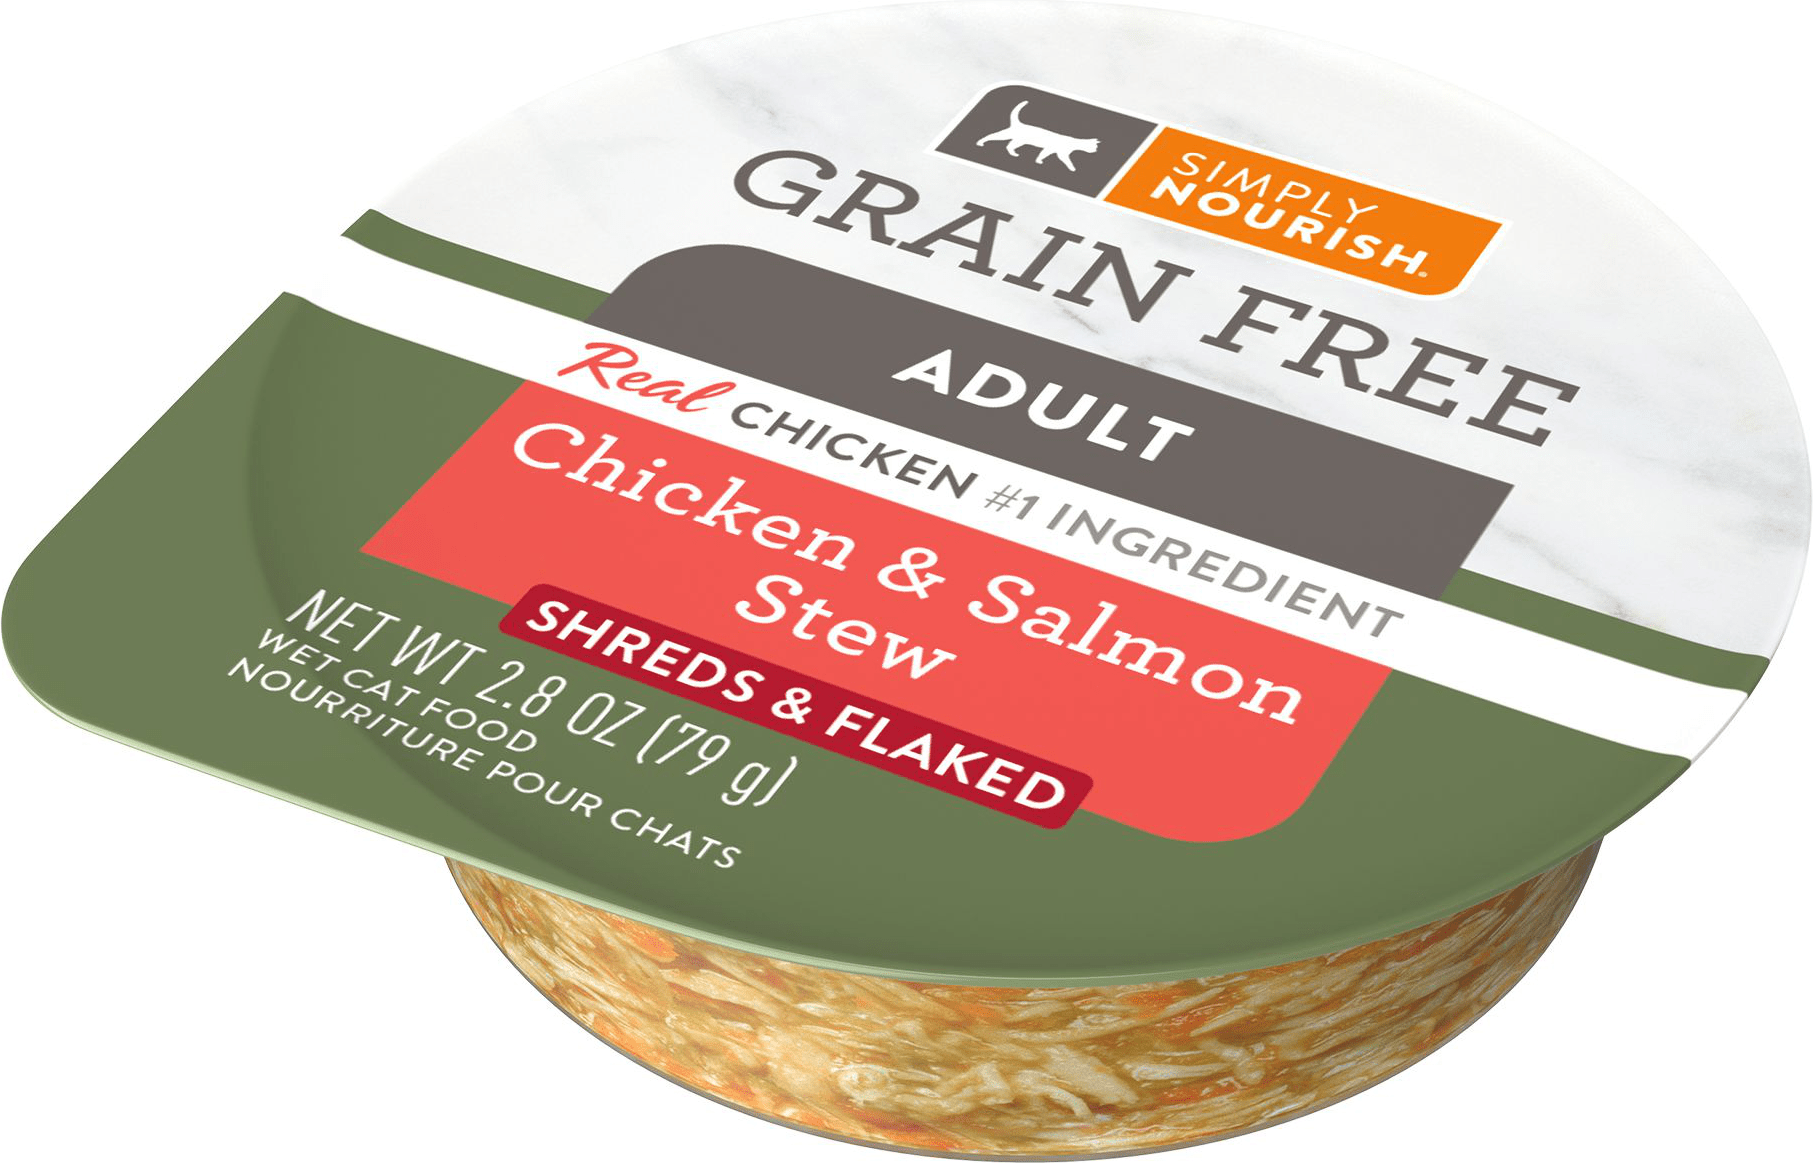 Simply Nourish Shreds & Flaked Adult Wet Cat Food Natural, Grain Free